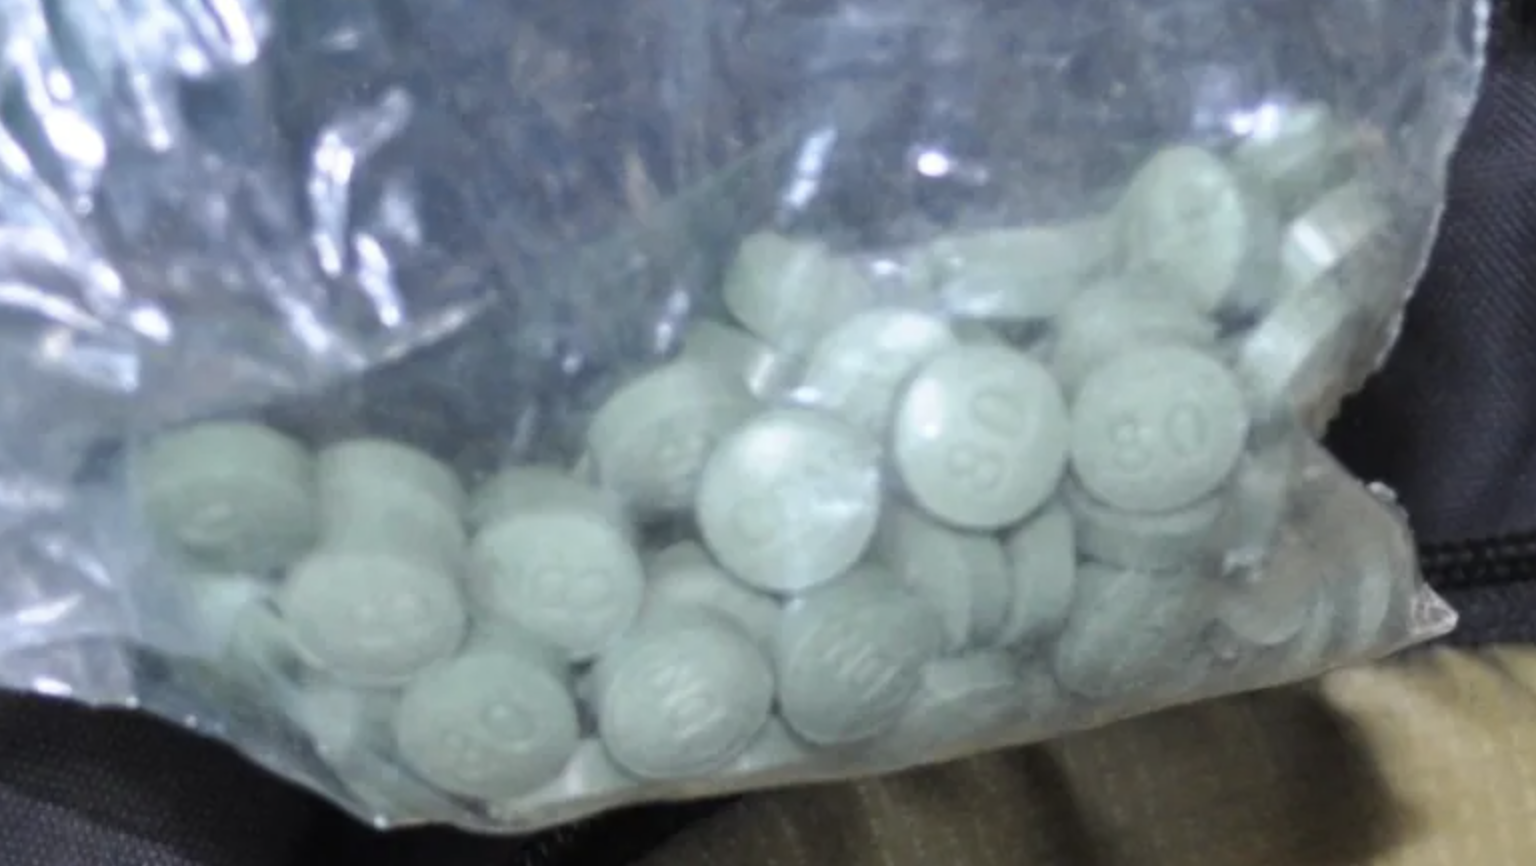 green pills that resemble oxycodone in a clear bag